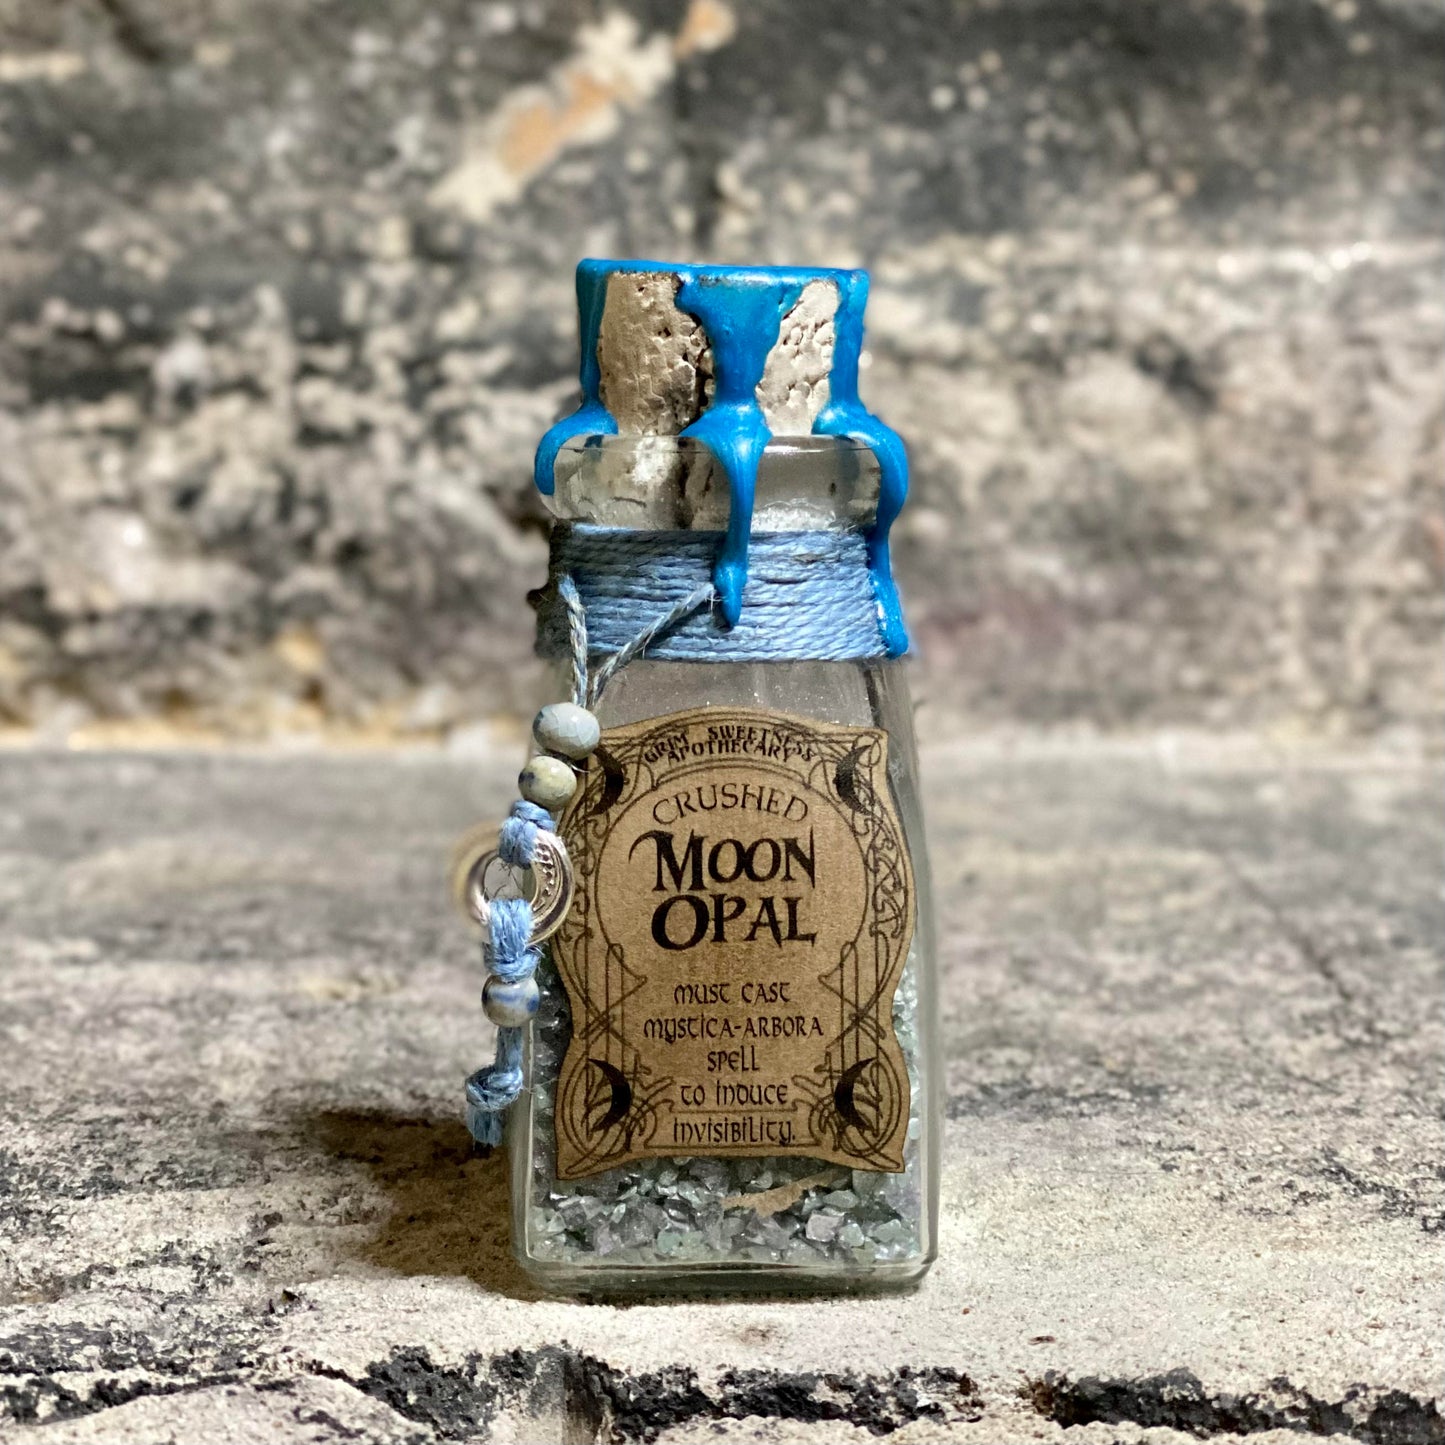 Crushed Moon Opal, A Dragon Prince Themed Apothecary Jar Prop